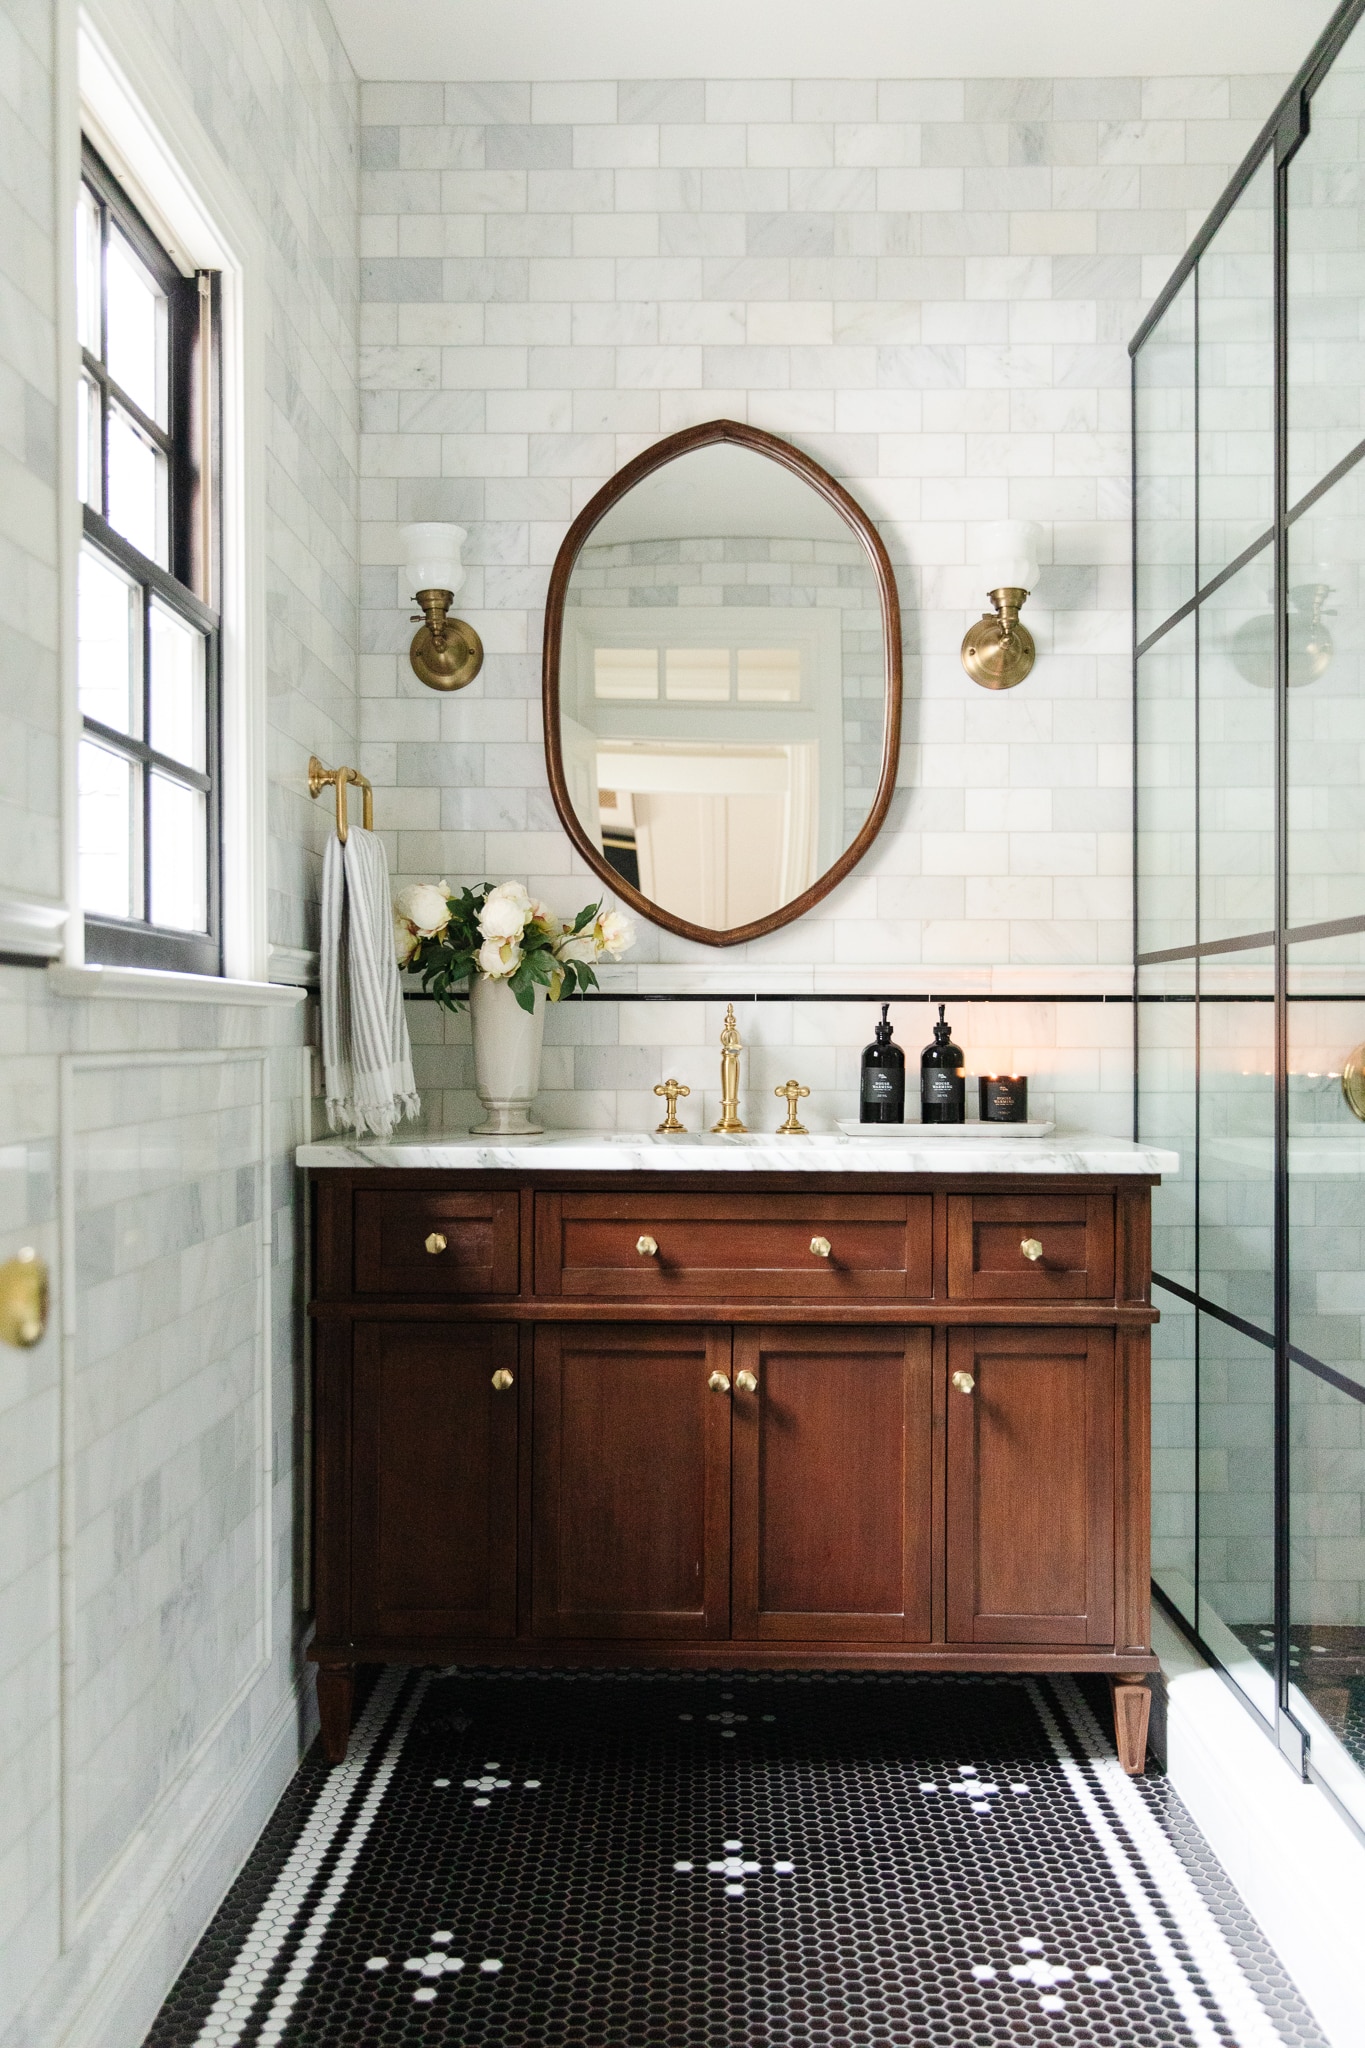 Chris Loves Julia | Greta's bathroom with beautiful wood vanity, marble counter and marble tile walls